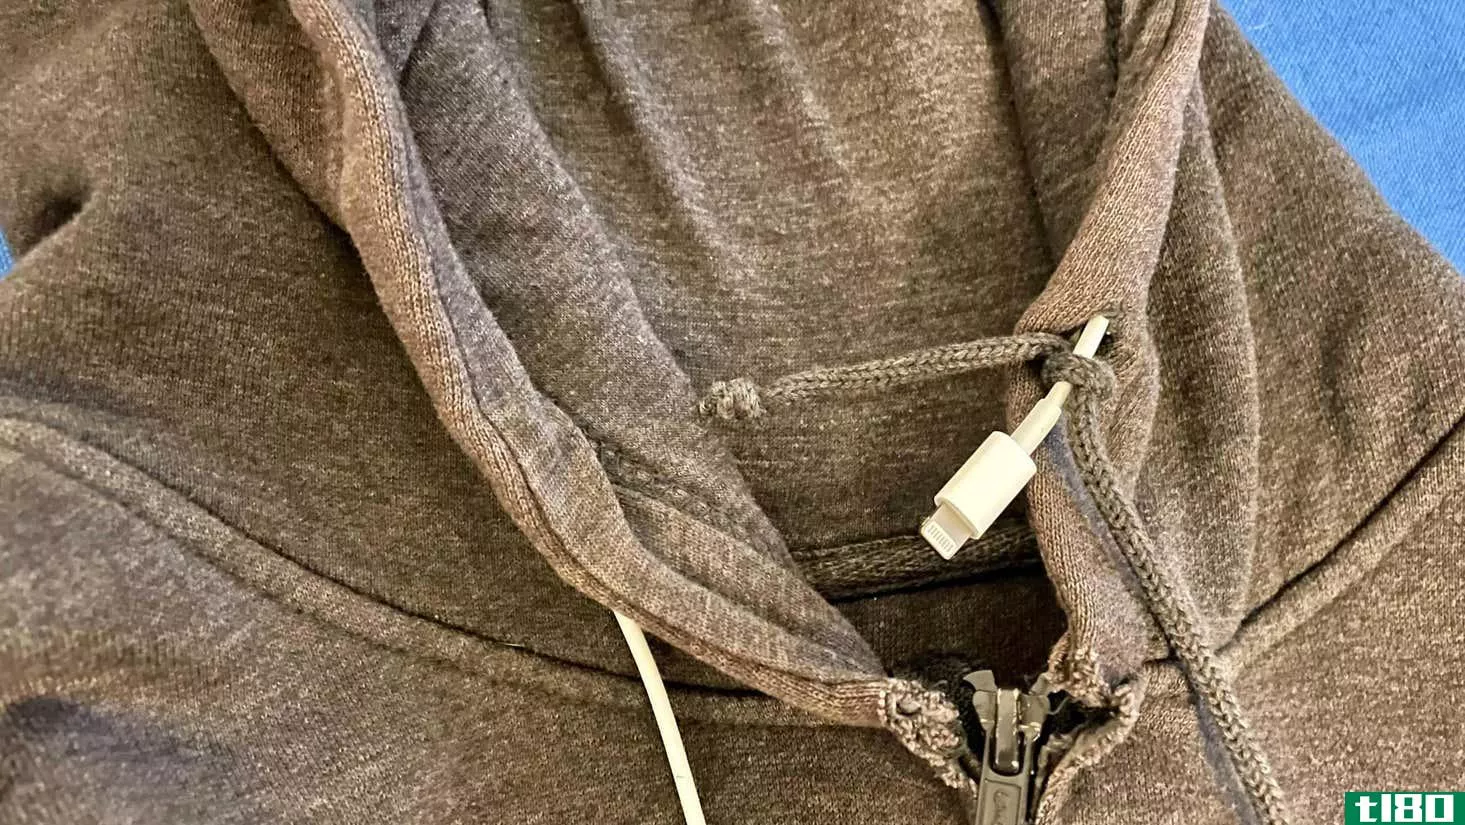 iPhone cable through hoodie drawstring channel, with the drawstring tied around it just before being pulled through.